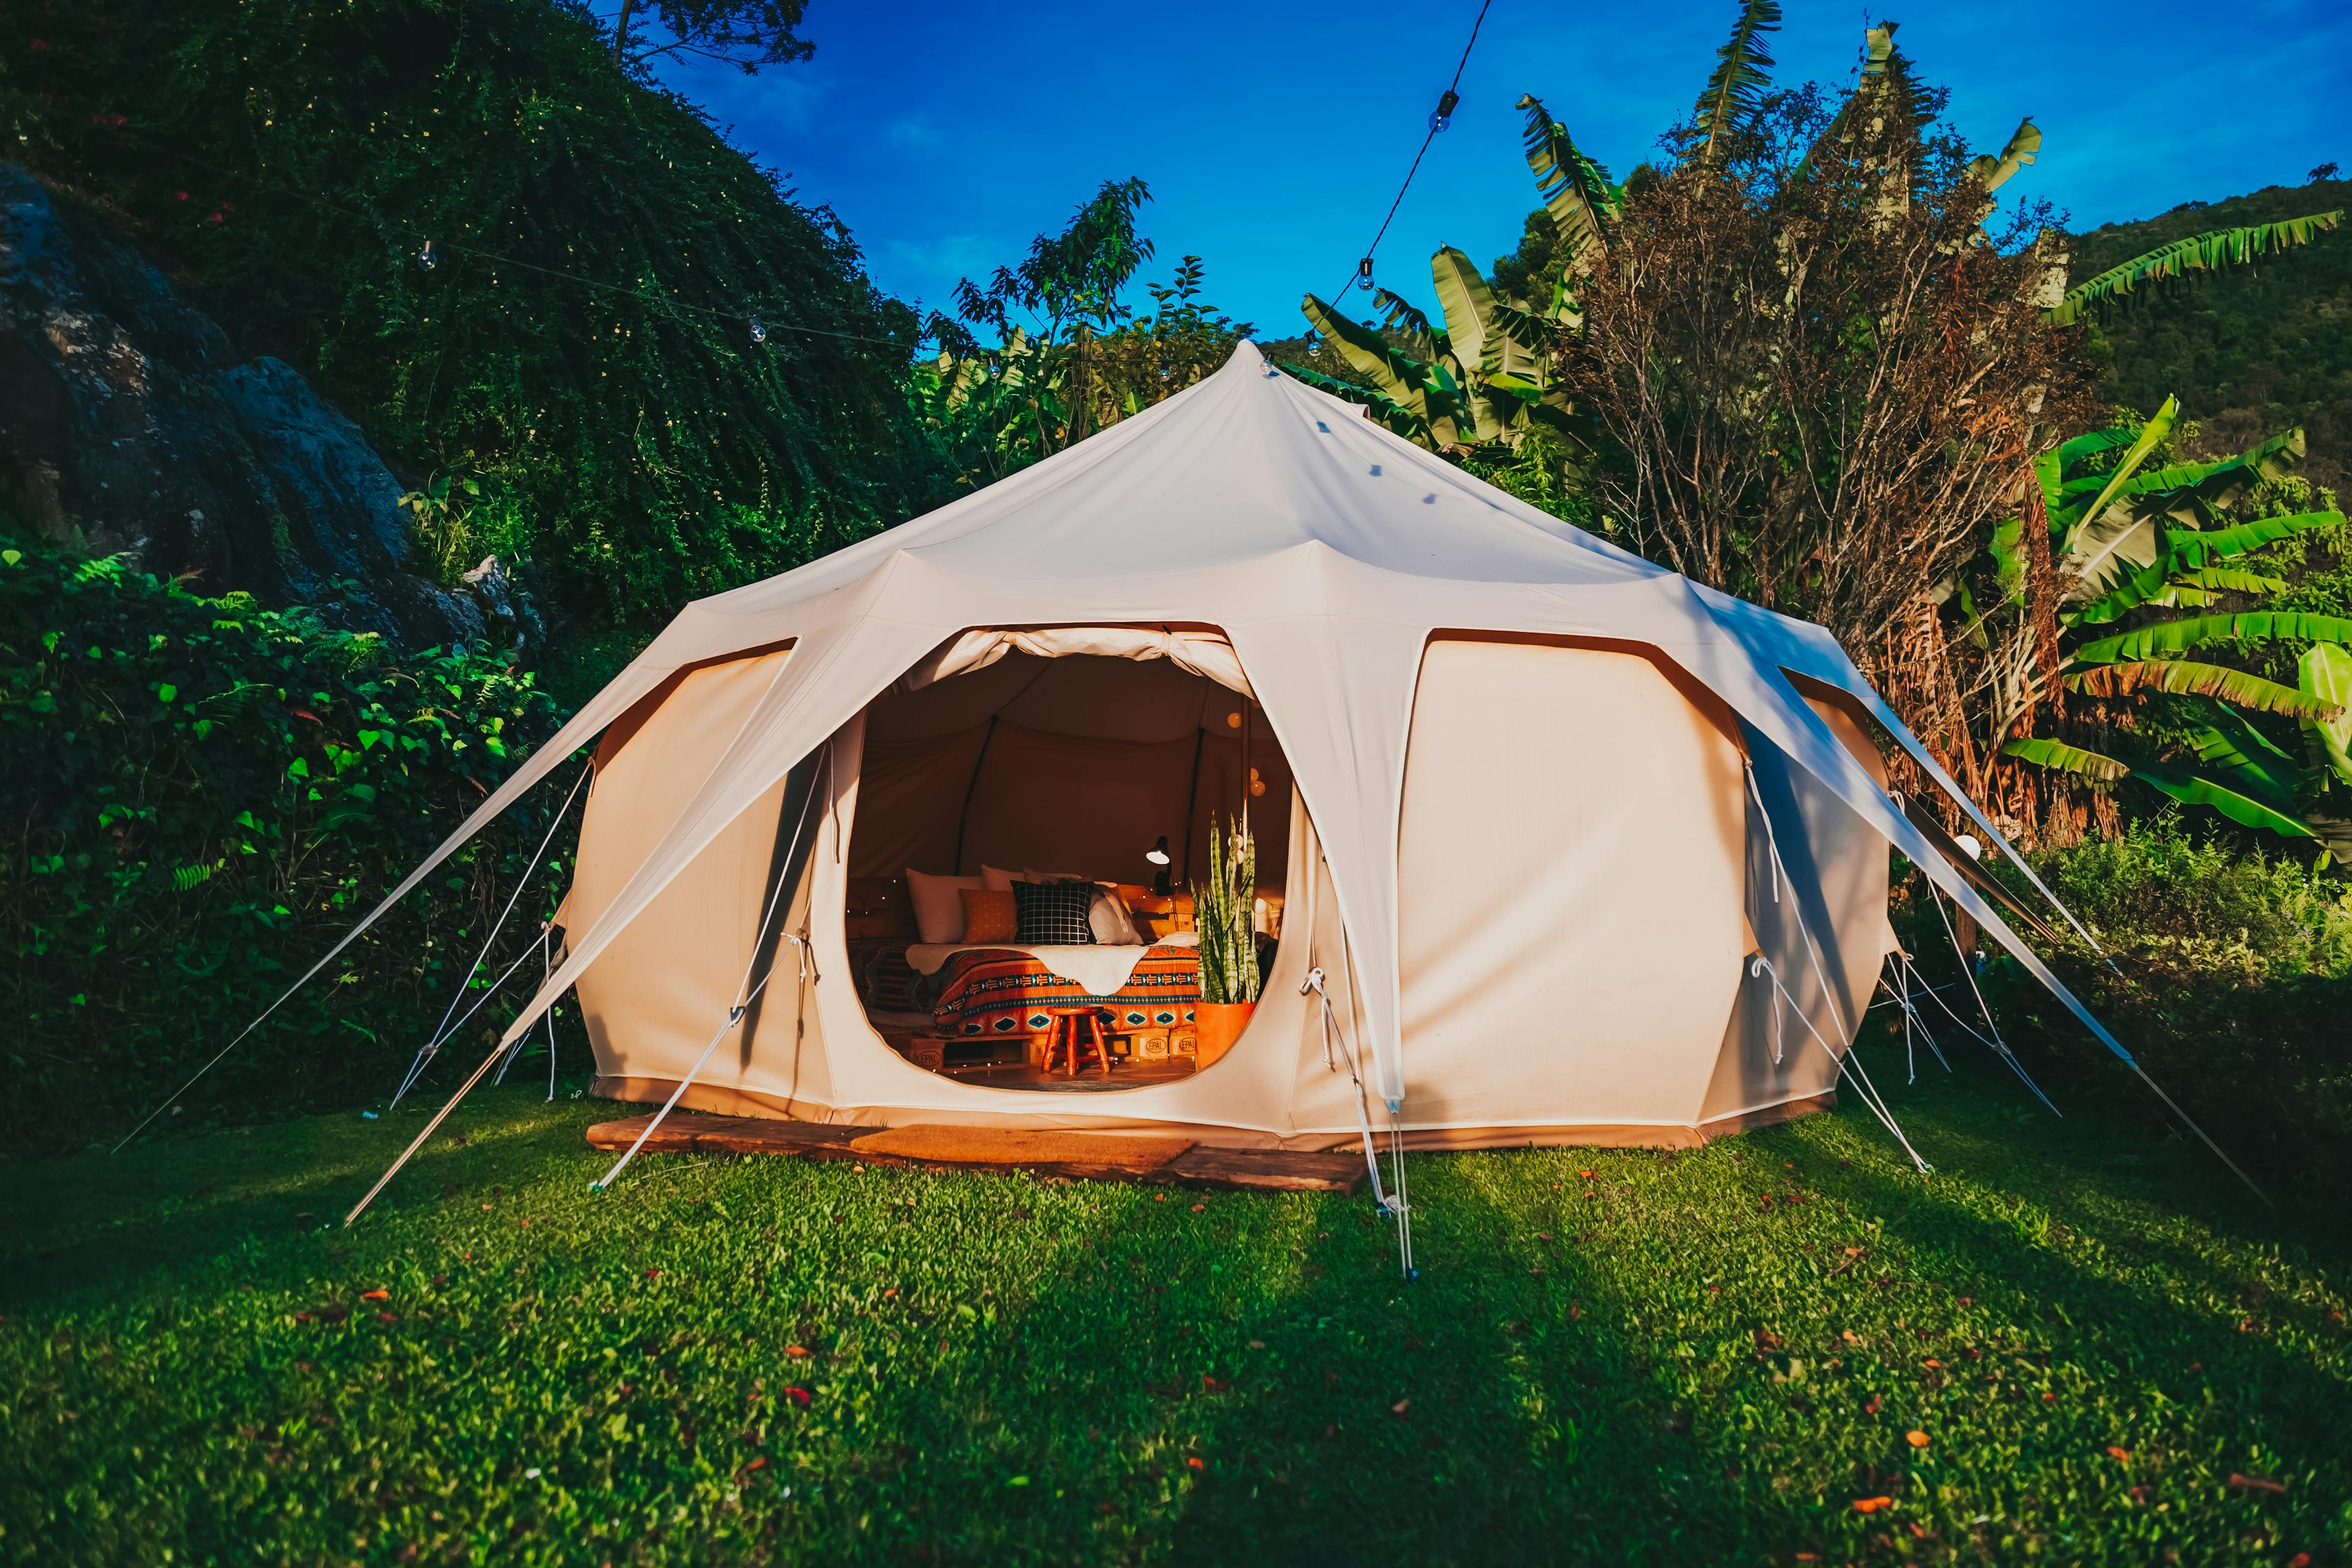 Canvas or Nylon Tent? Which Should You Buy For Your Camping Trip